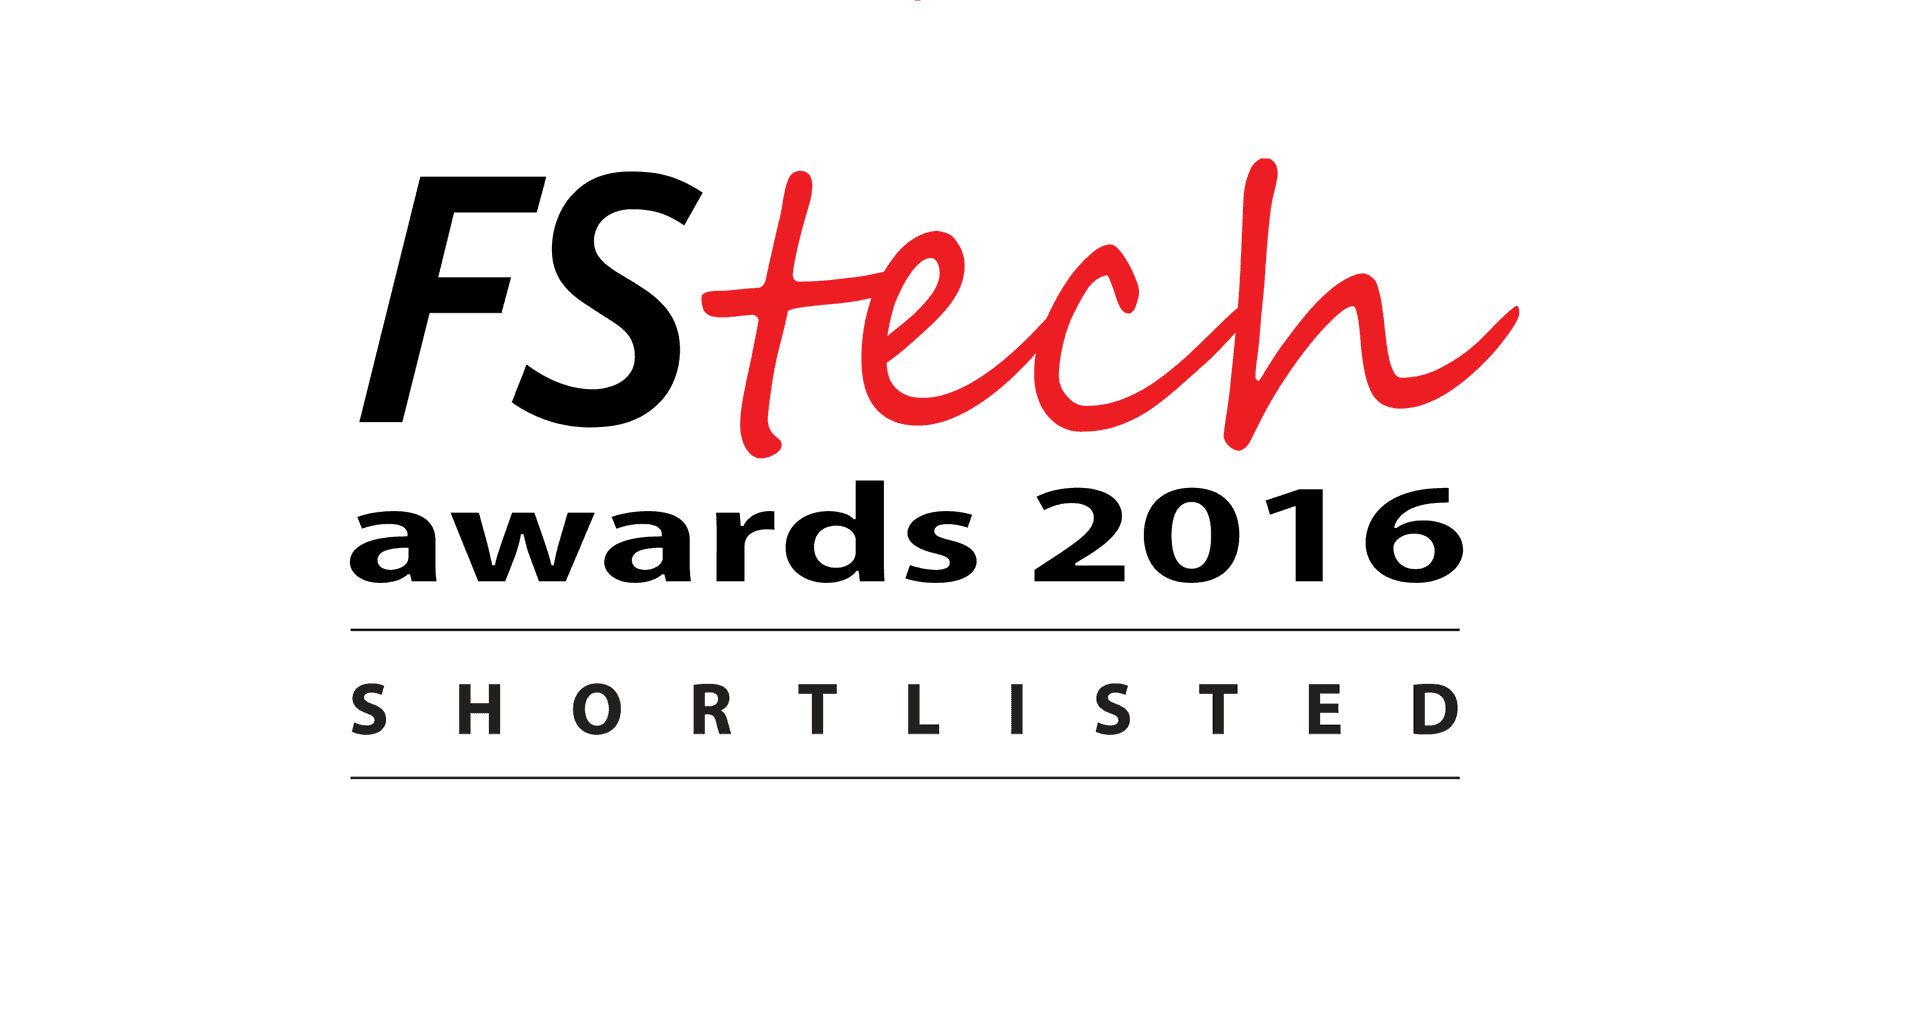 We’ve been shortlisted for the 2016 FSTech Awards!